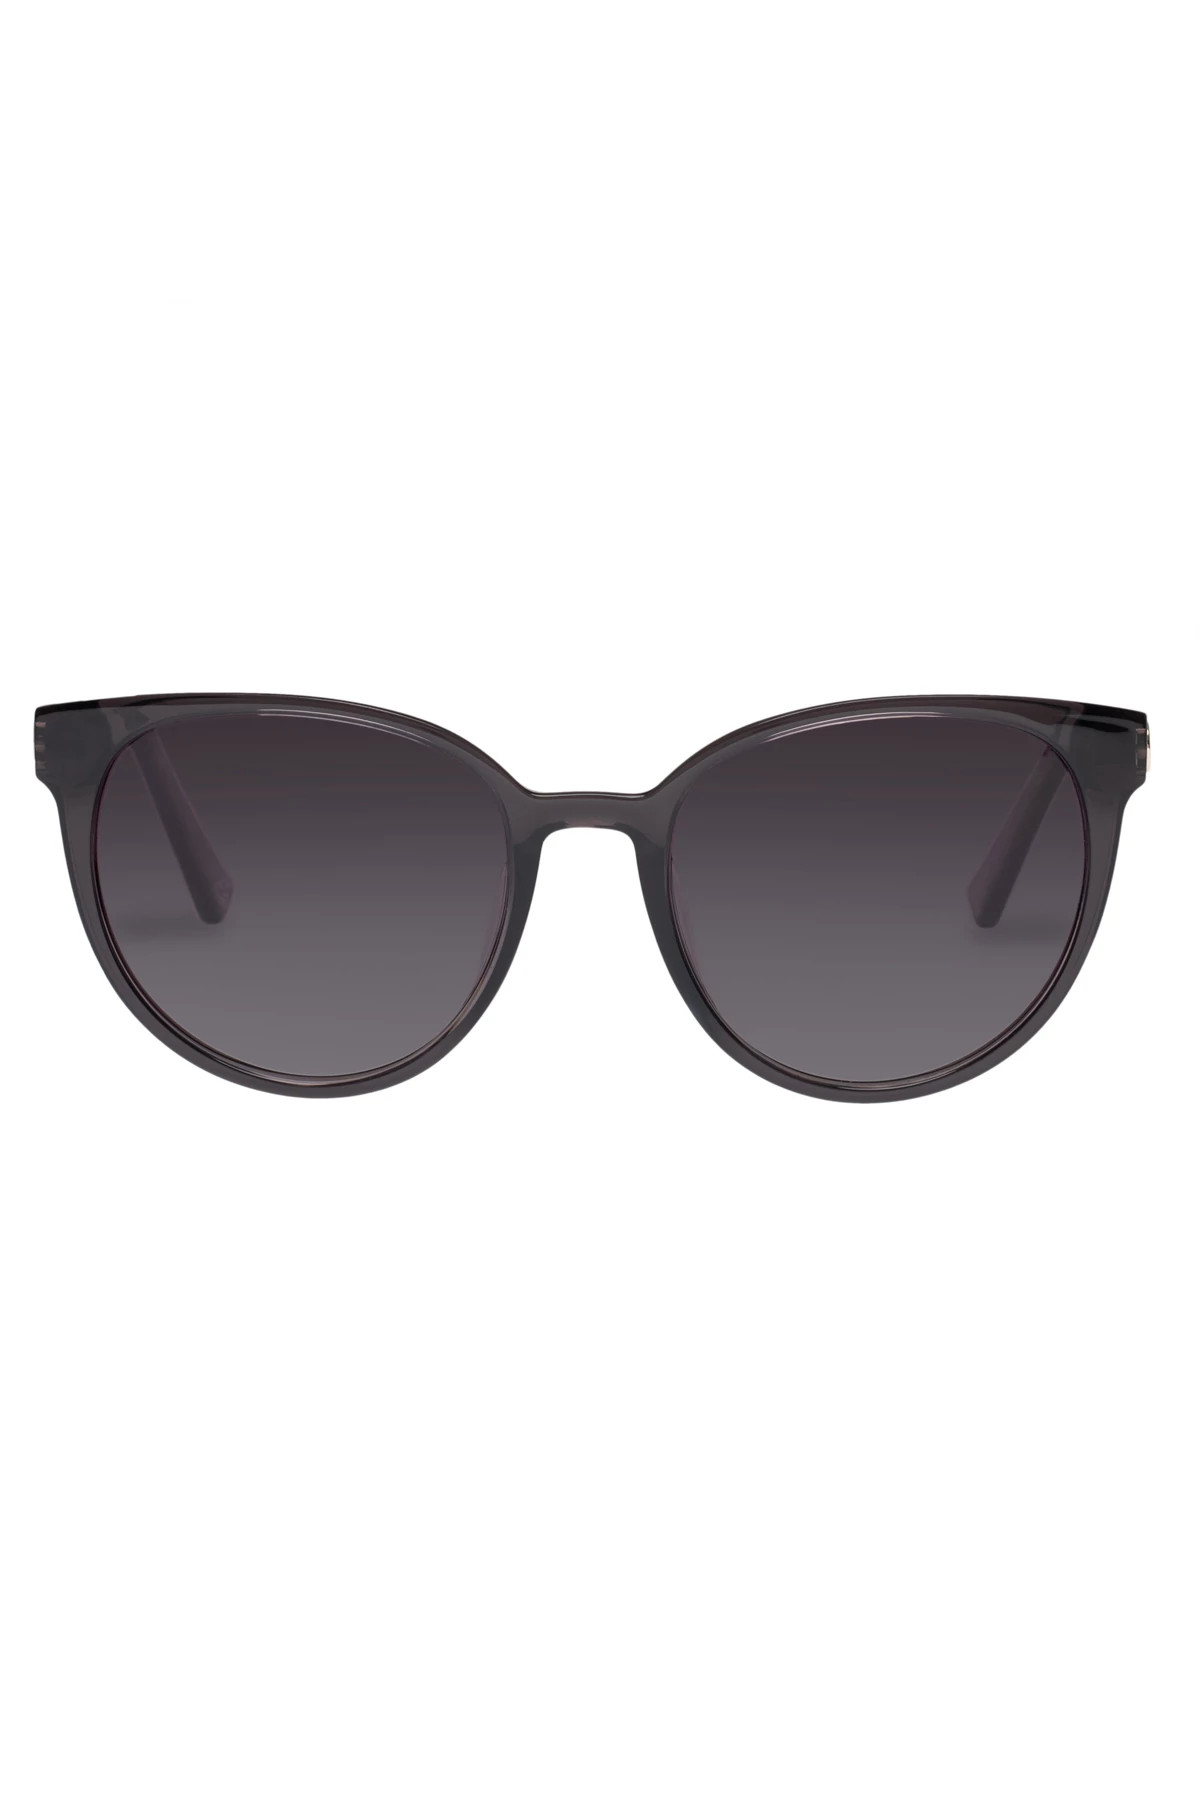 CHARCOAL Contention Classic Round Sunglasses image number 2